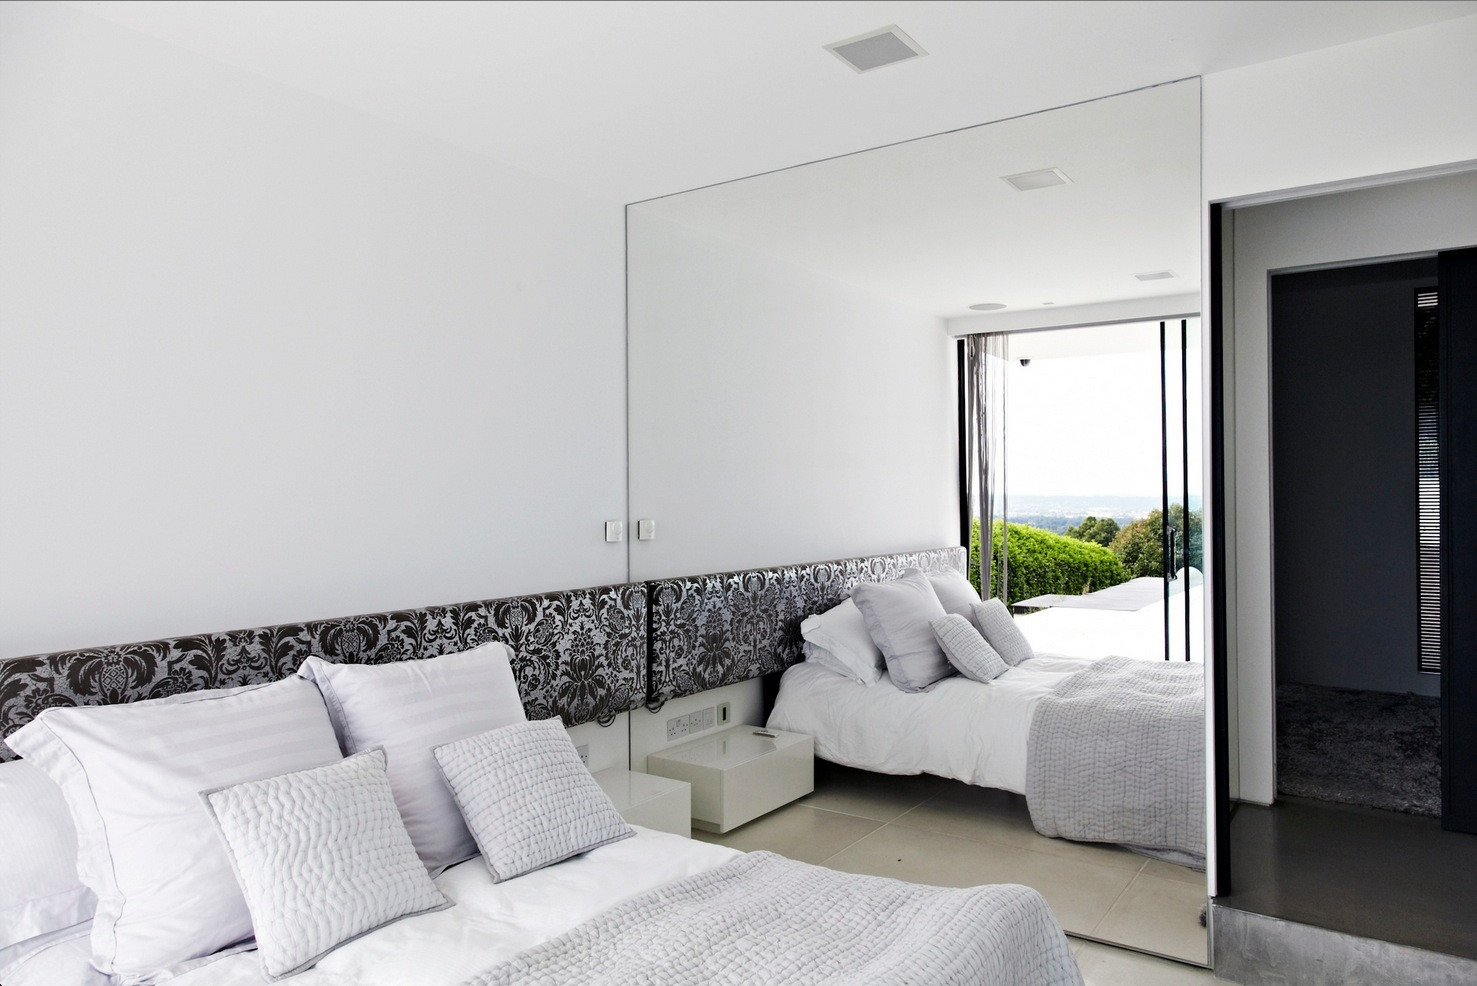 Wall Mirror For Bedroom
 Contemporary Home Open to Panoramic Views